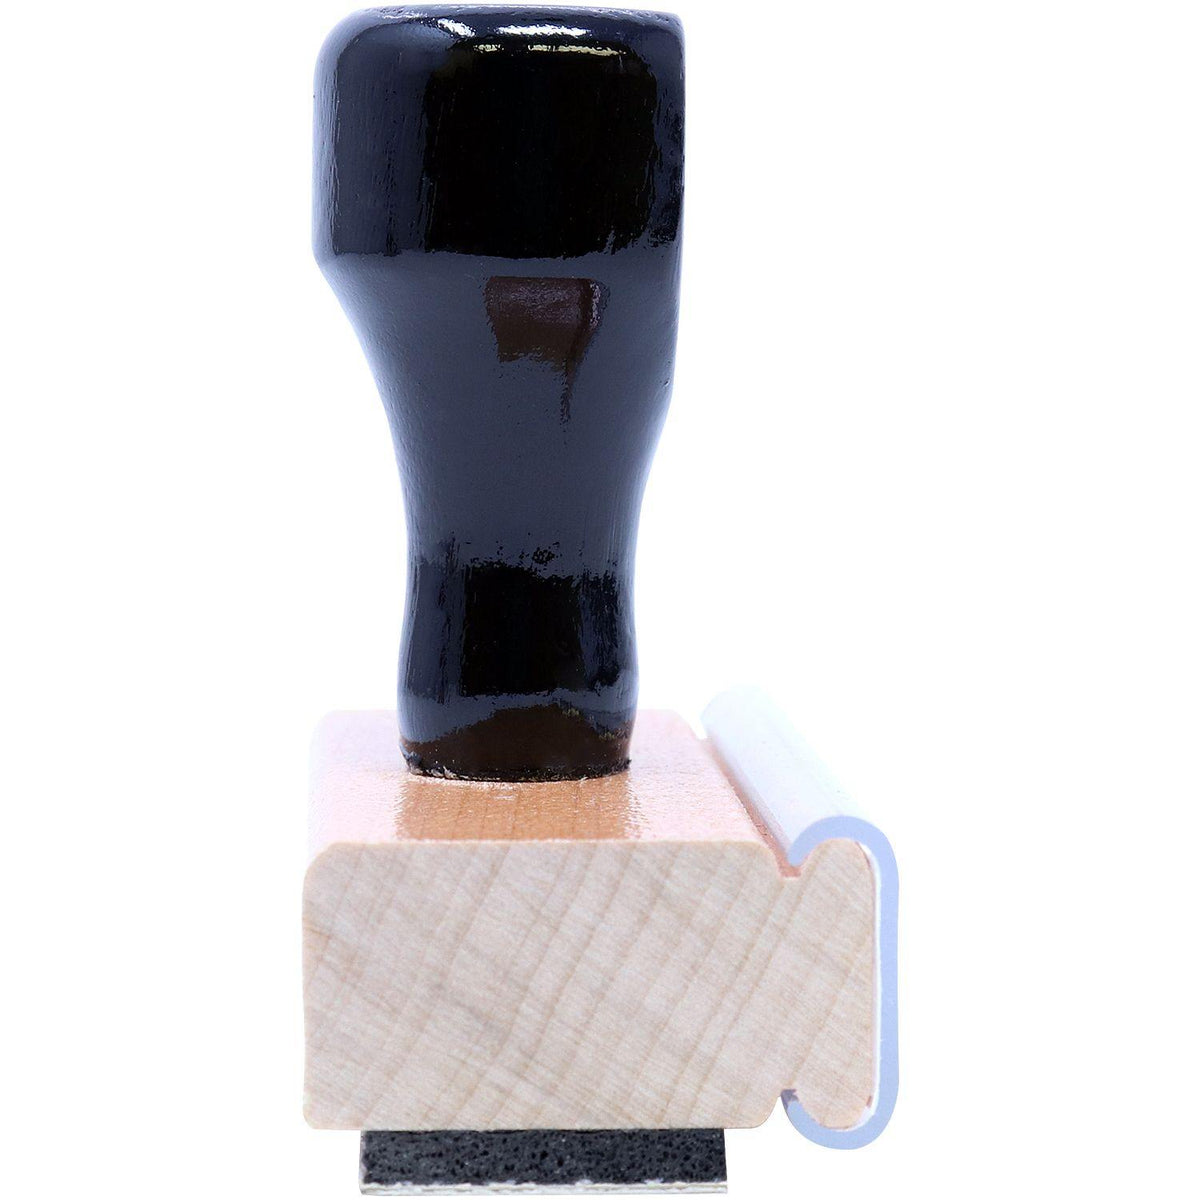 Side View of Large No Mail Receptacle Rubber Stamp